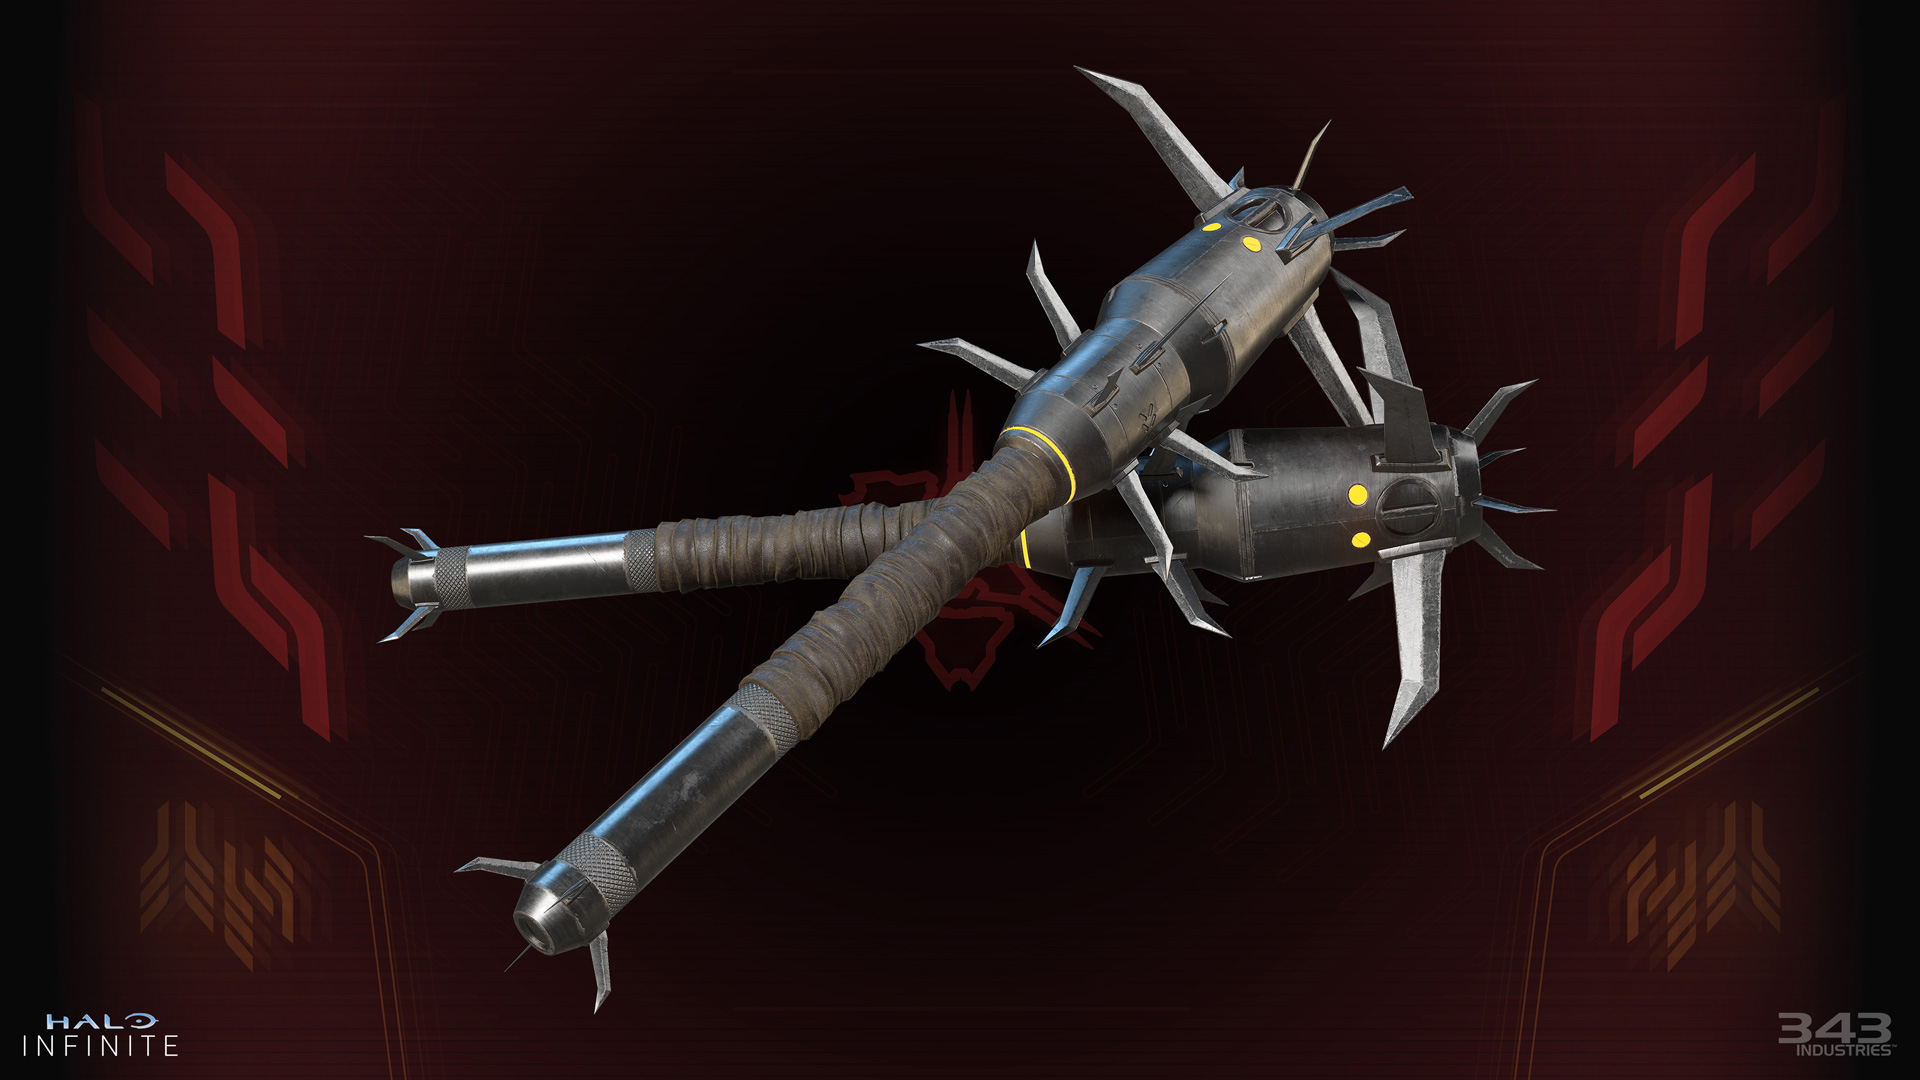 Renders of two Spike Grenades on a Banished background.